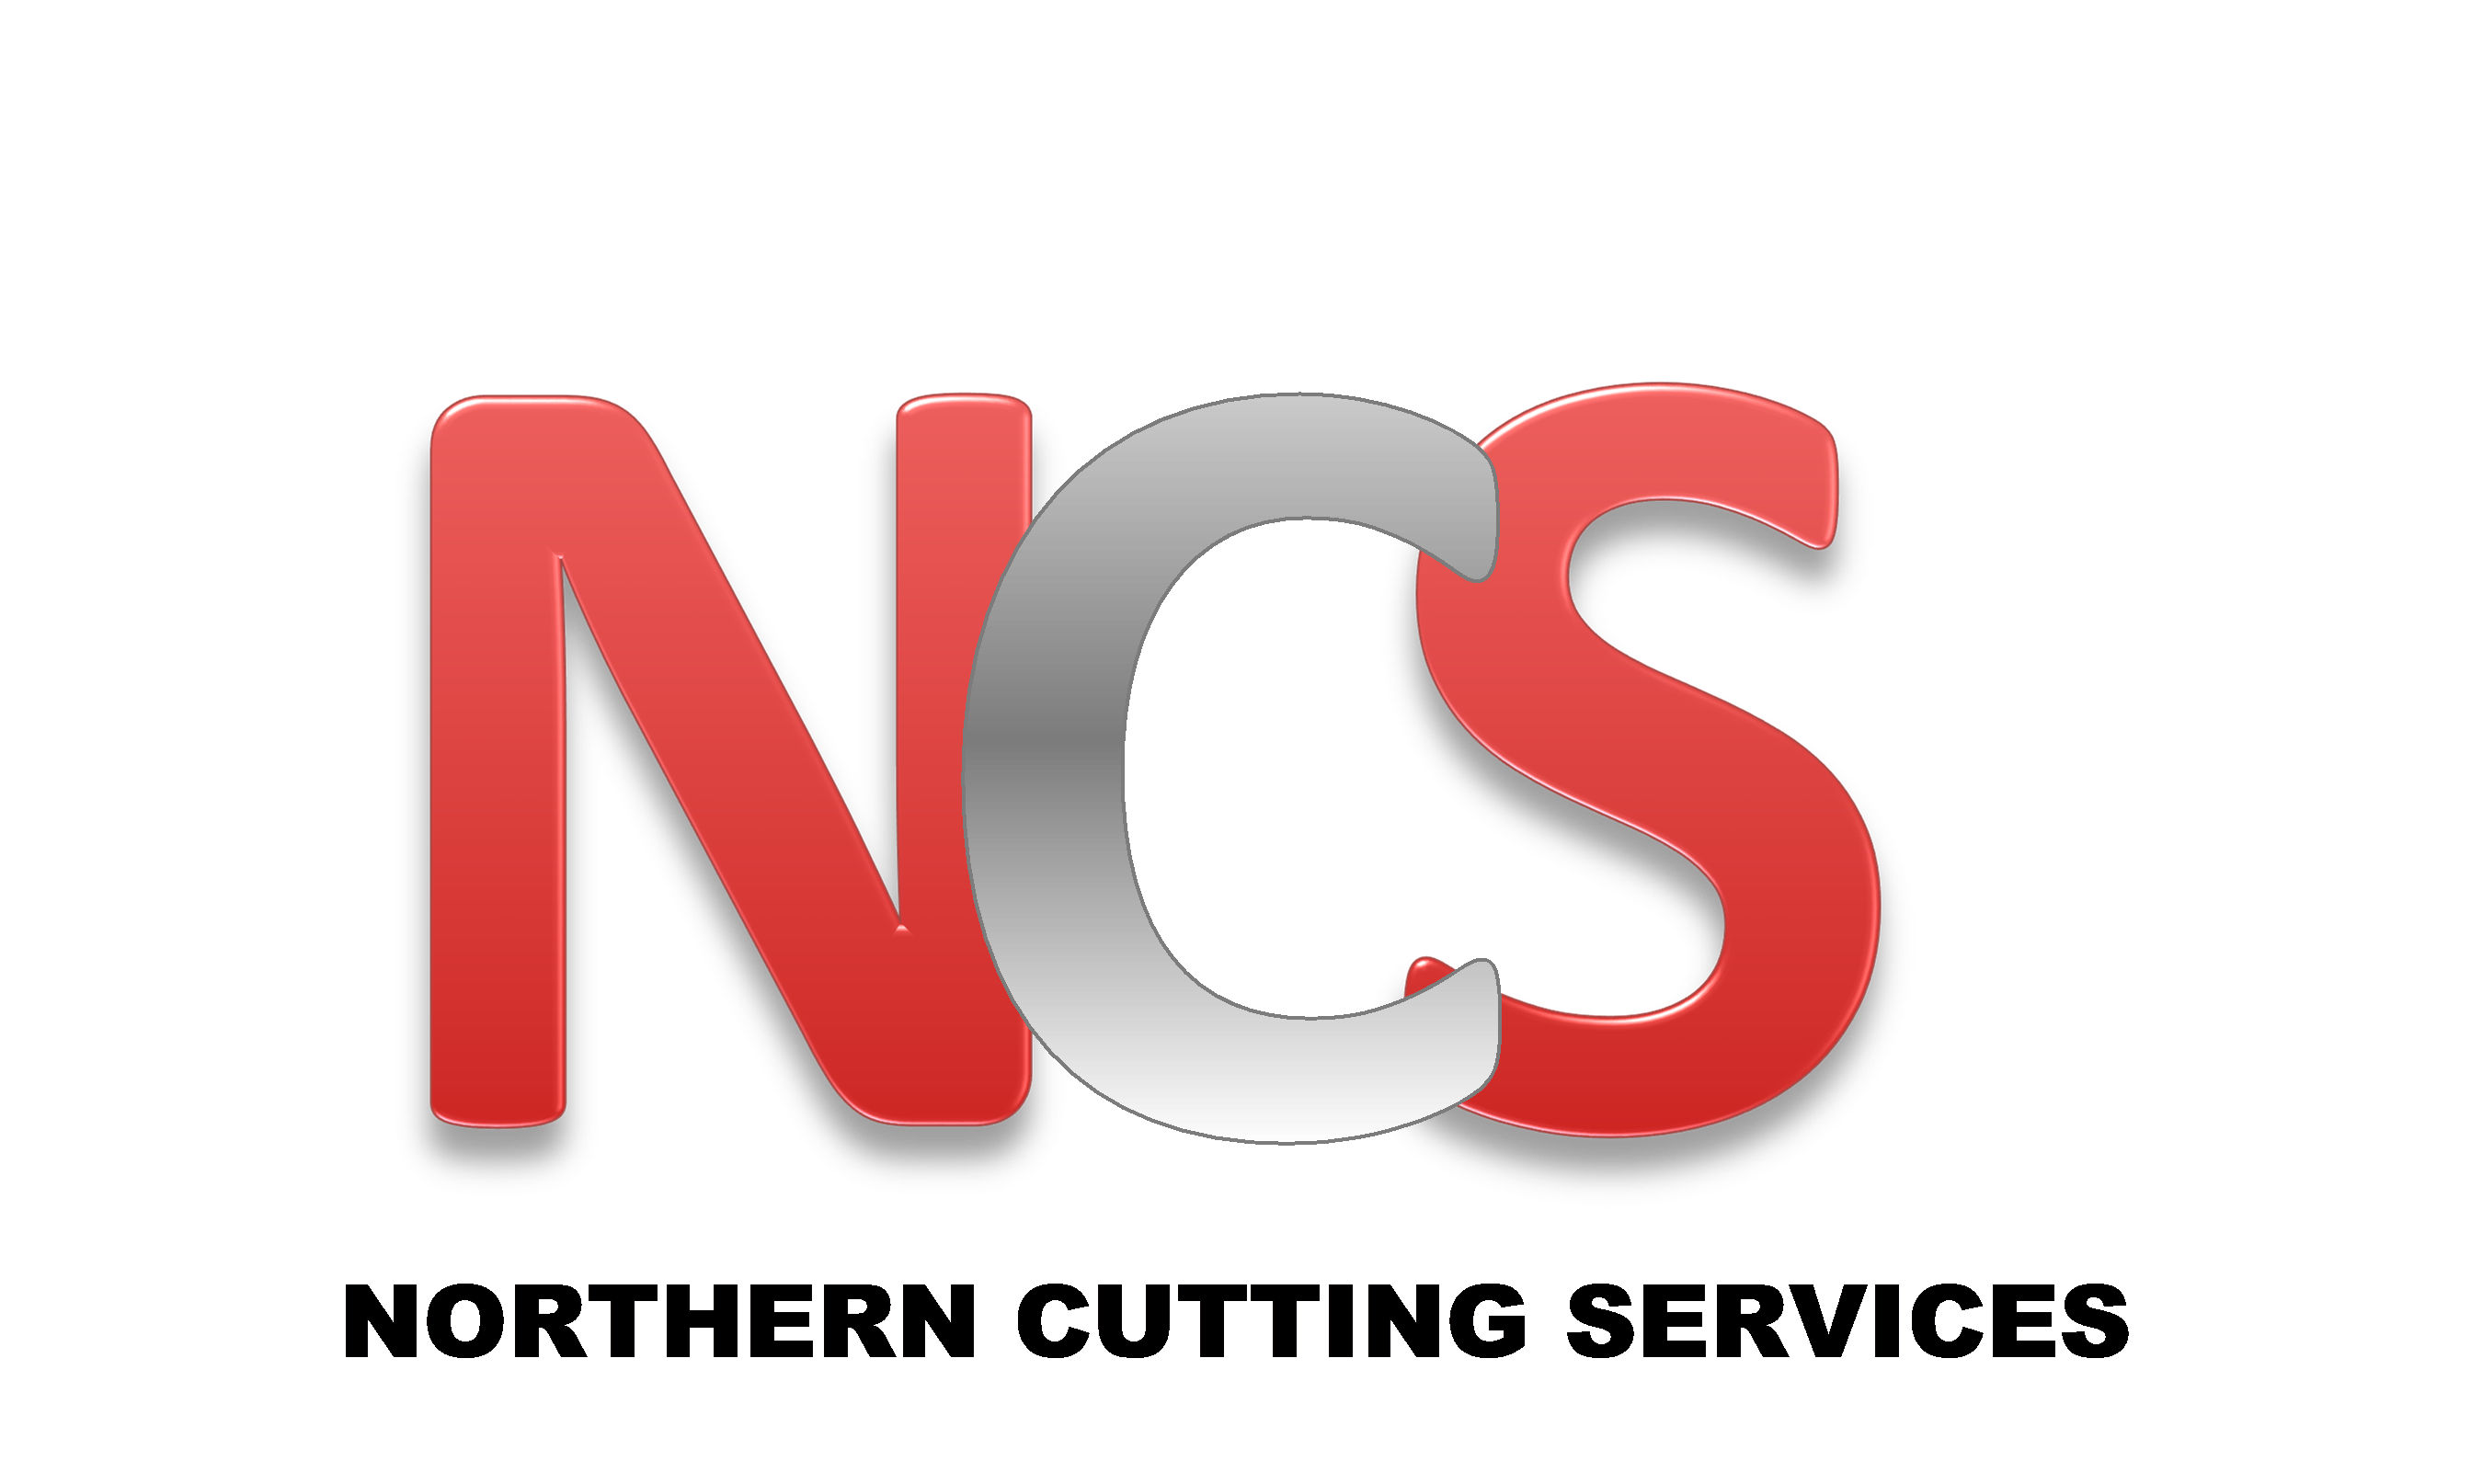 Northern Cutting Services